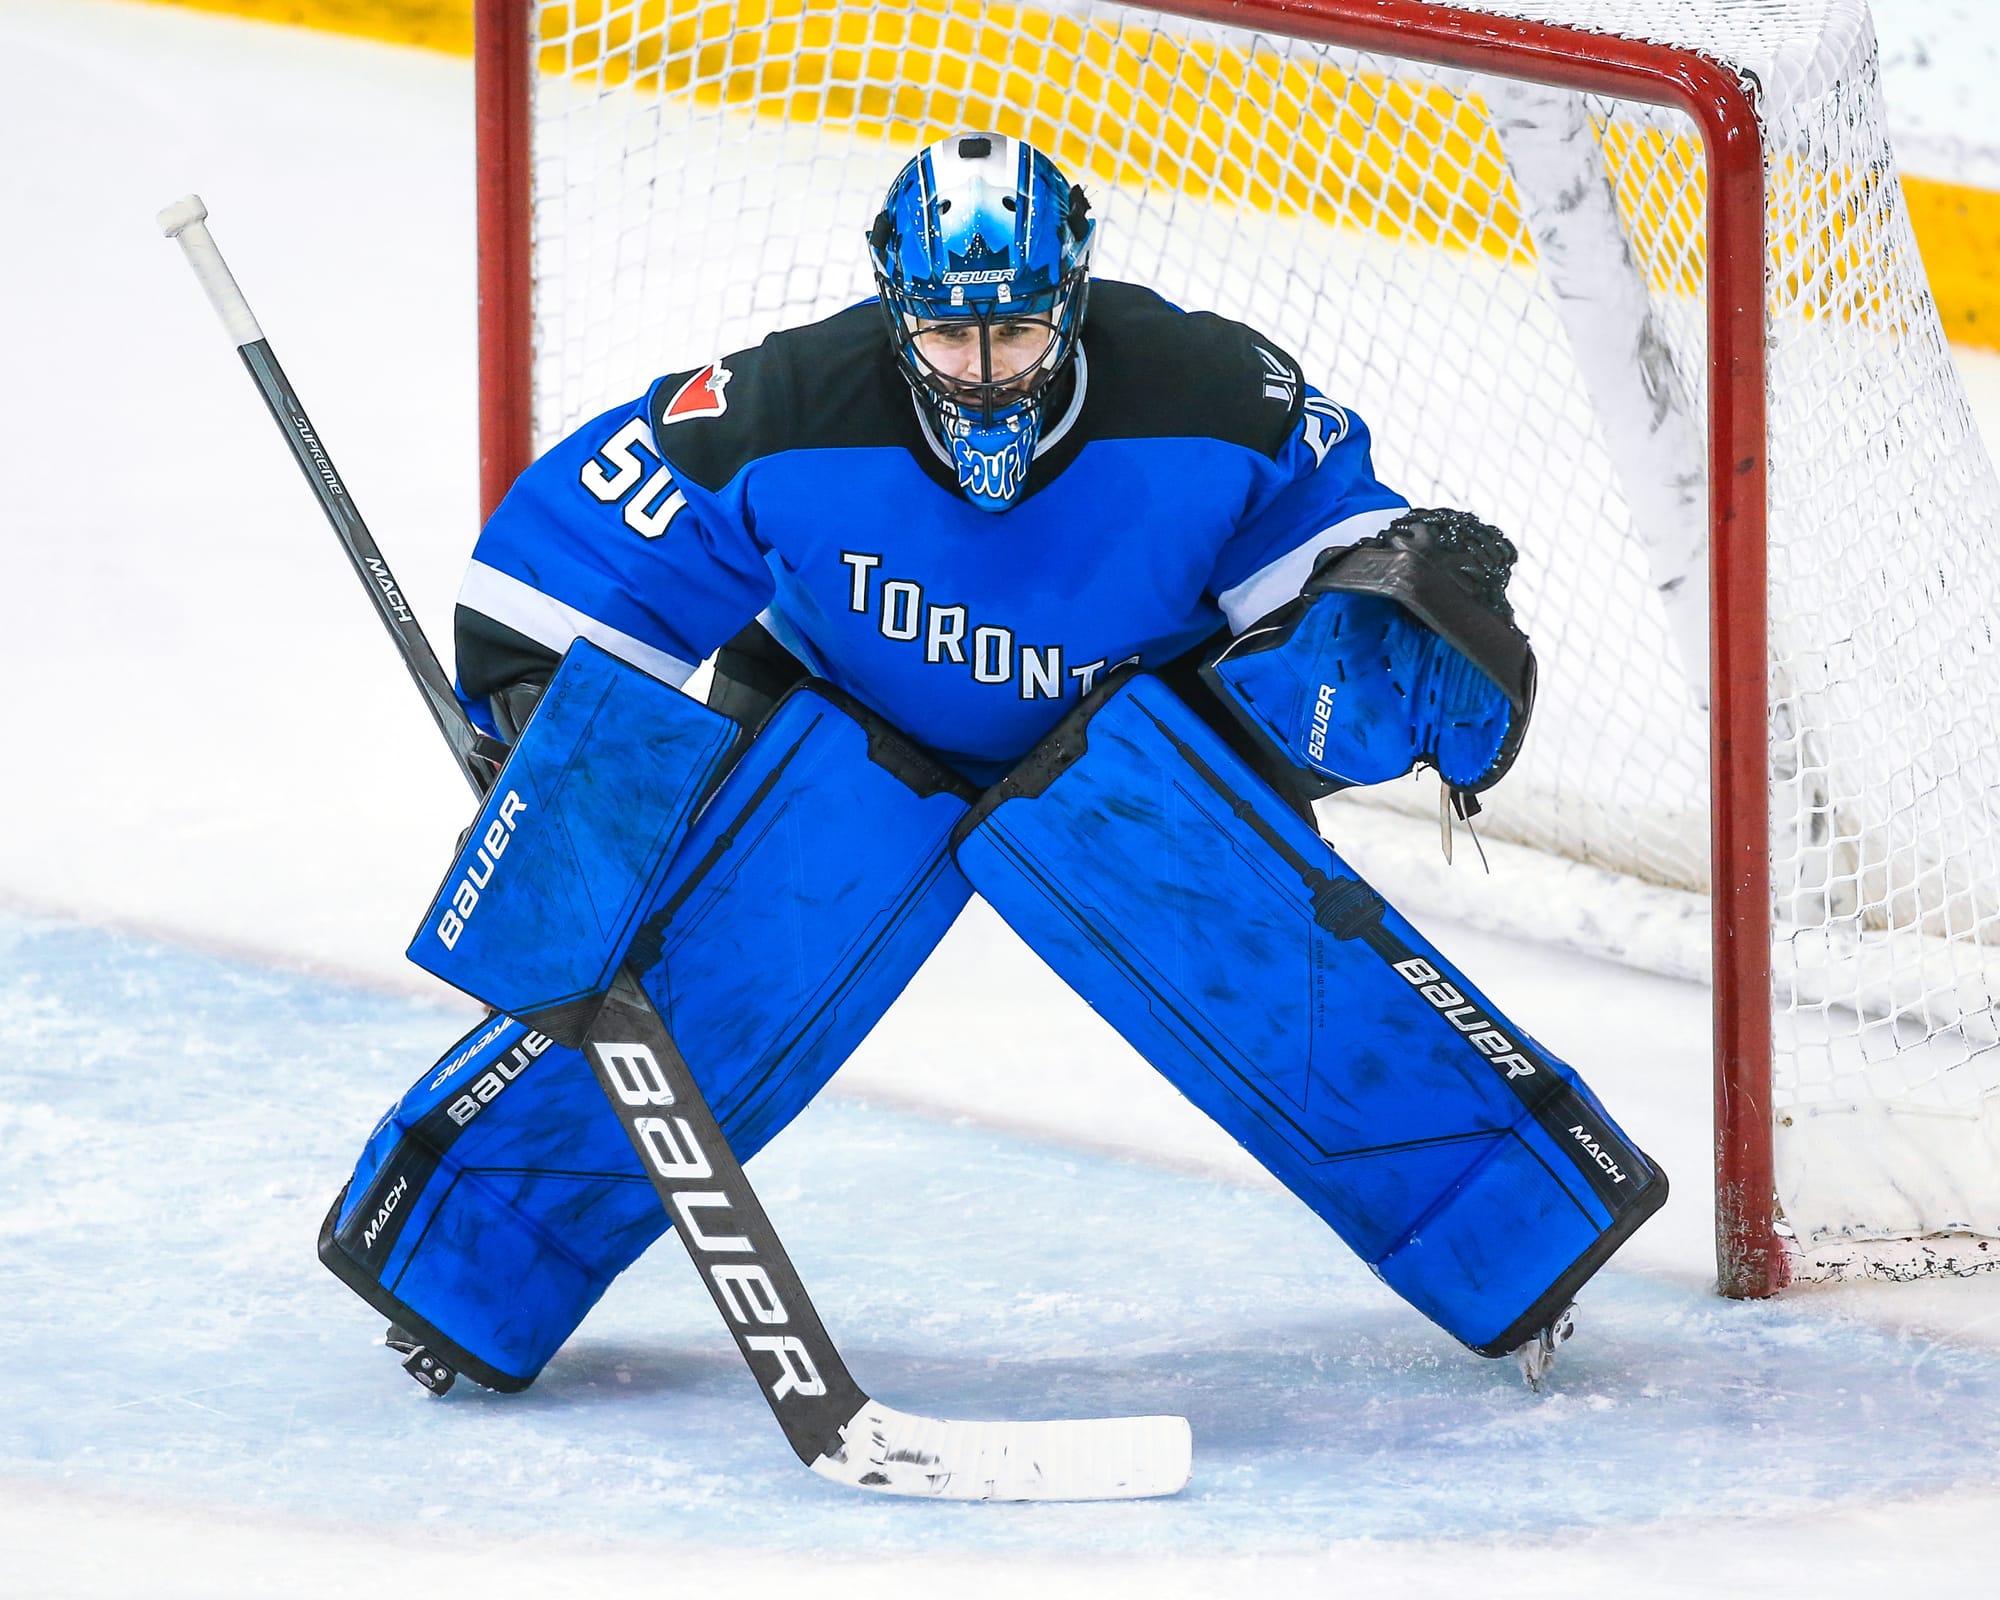 Kristen Campbell prepares to make a save. She is wearing her blue Toronto mask and gear, and a blue home uniform.